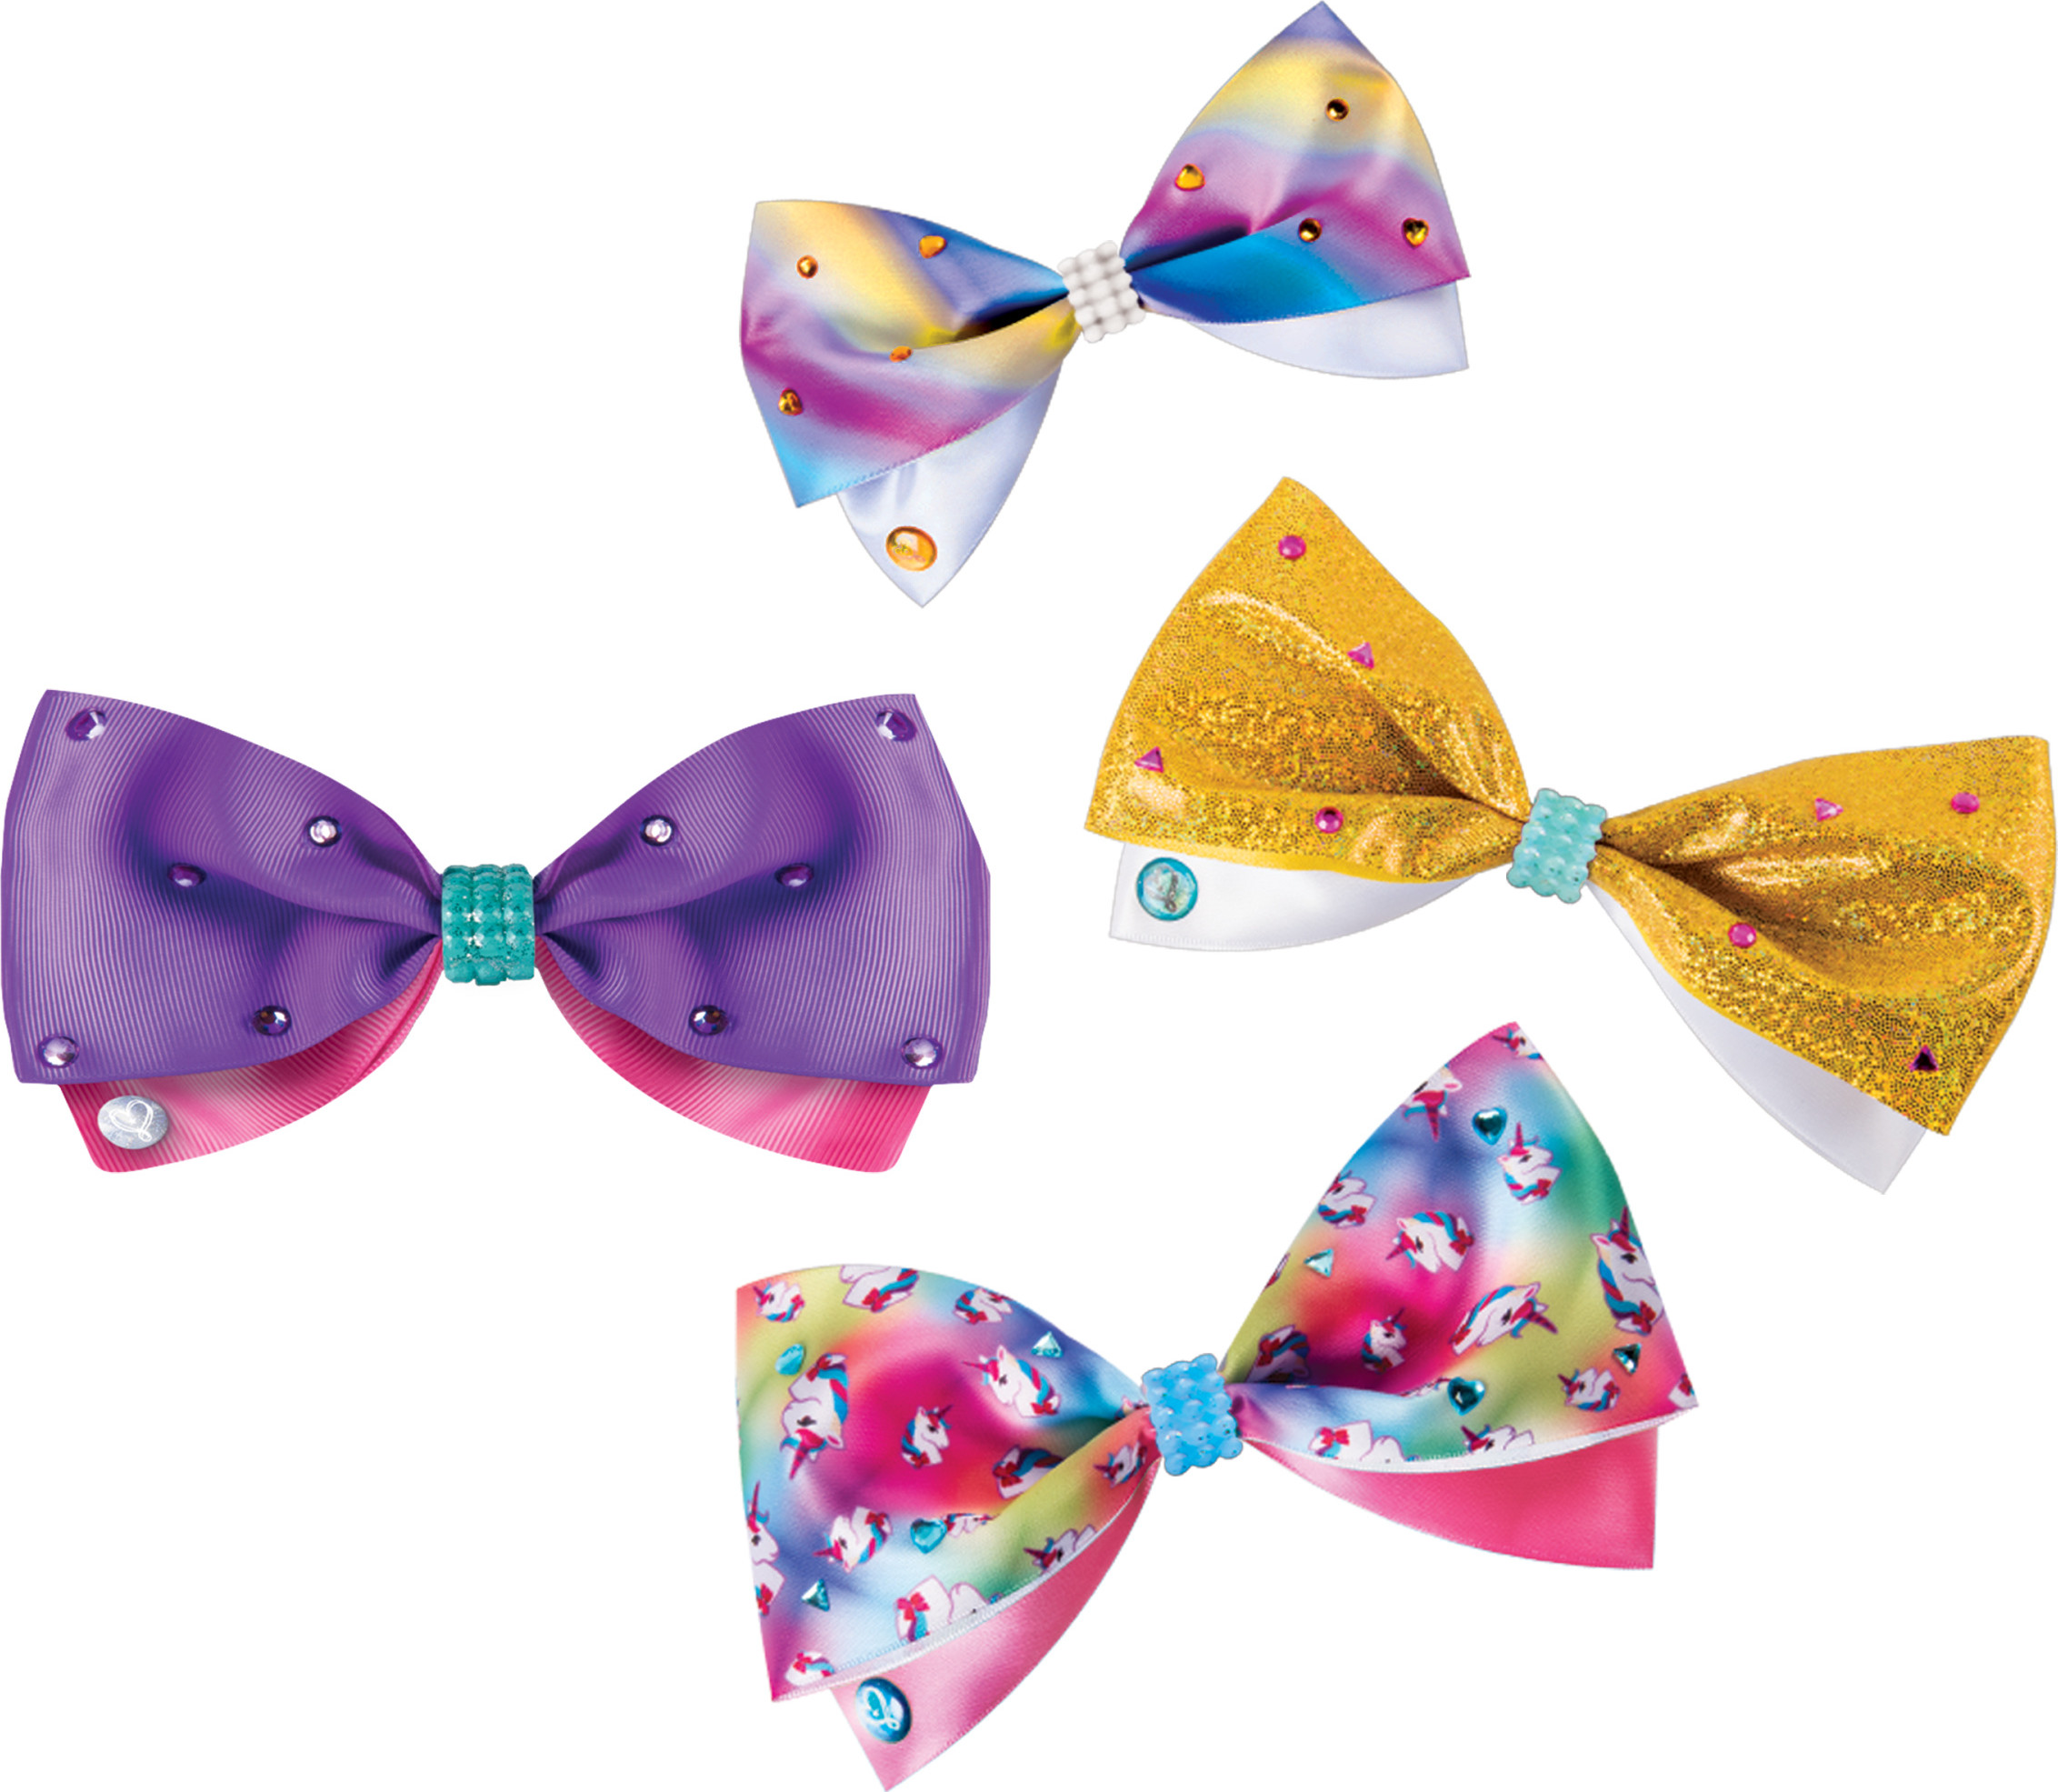 Cool Maker - JoJo Siwa Bow Maker with Rainbow and Unicorn Patterns, for Ages 6 and Up (Edition May Vary) - image 5 of 6